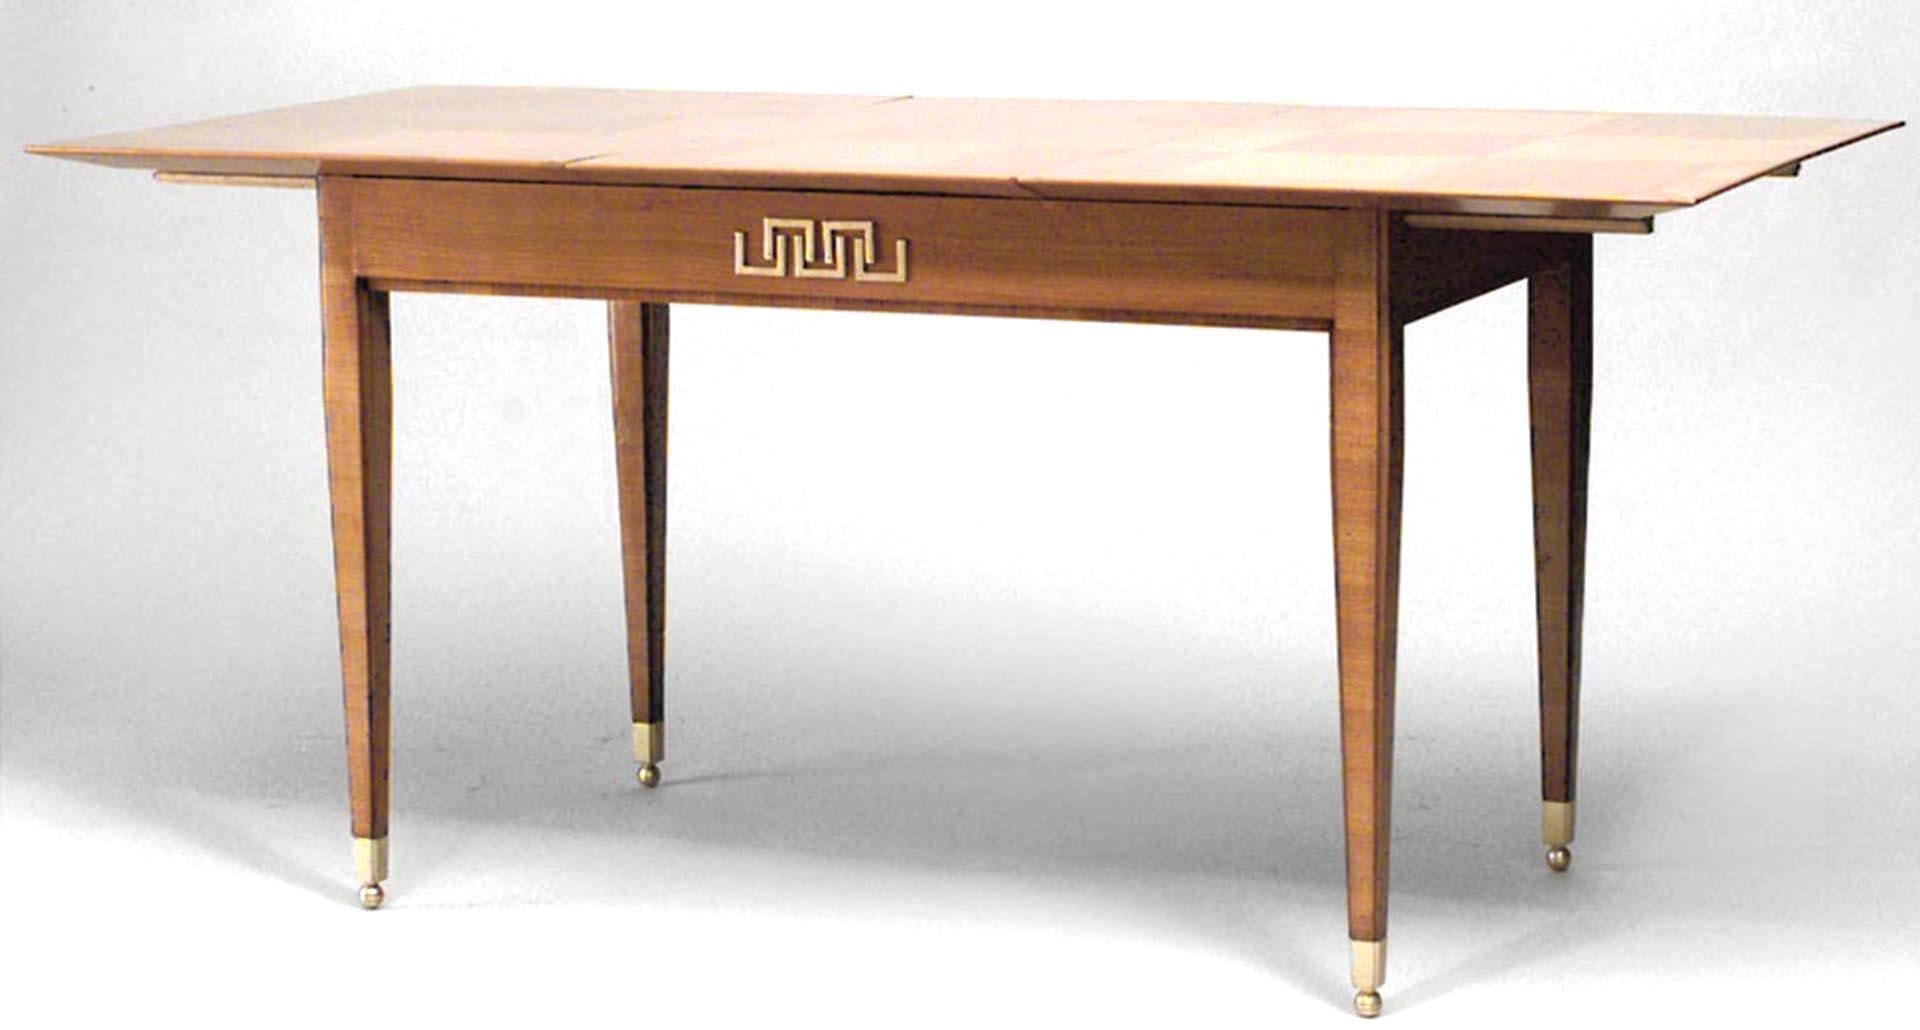 French mid-century (1940s) ormolu mounted, fruitwood, maple & parquetry extending dining table. (1 leaf - 17.5 inches) (By LUCIEN ROLLIN, branded 